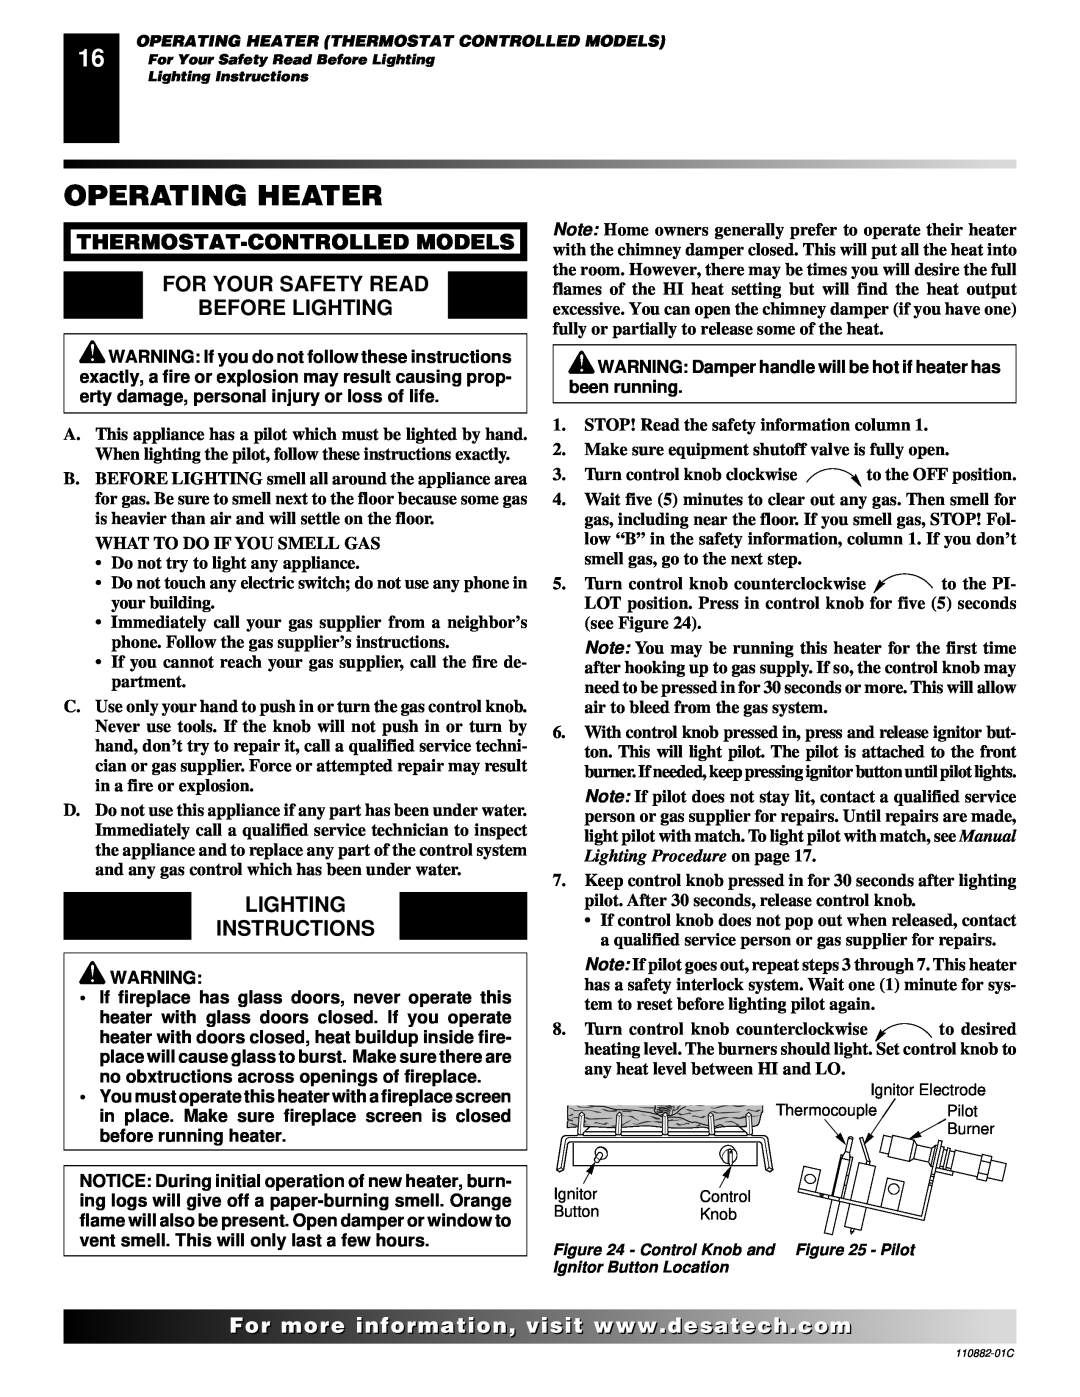 Desa 30 Operating Heater, Thermostat-Controlledmodels For Your Safety Read, Before Lighting, Lighting Instructions 